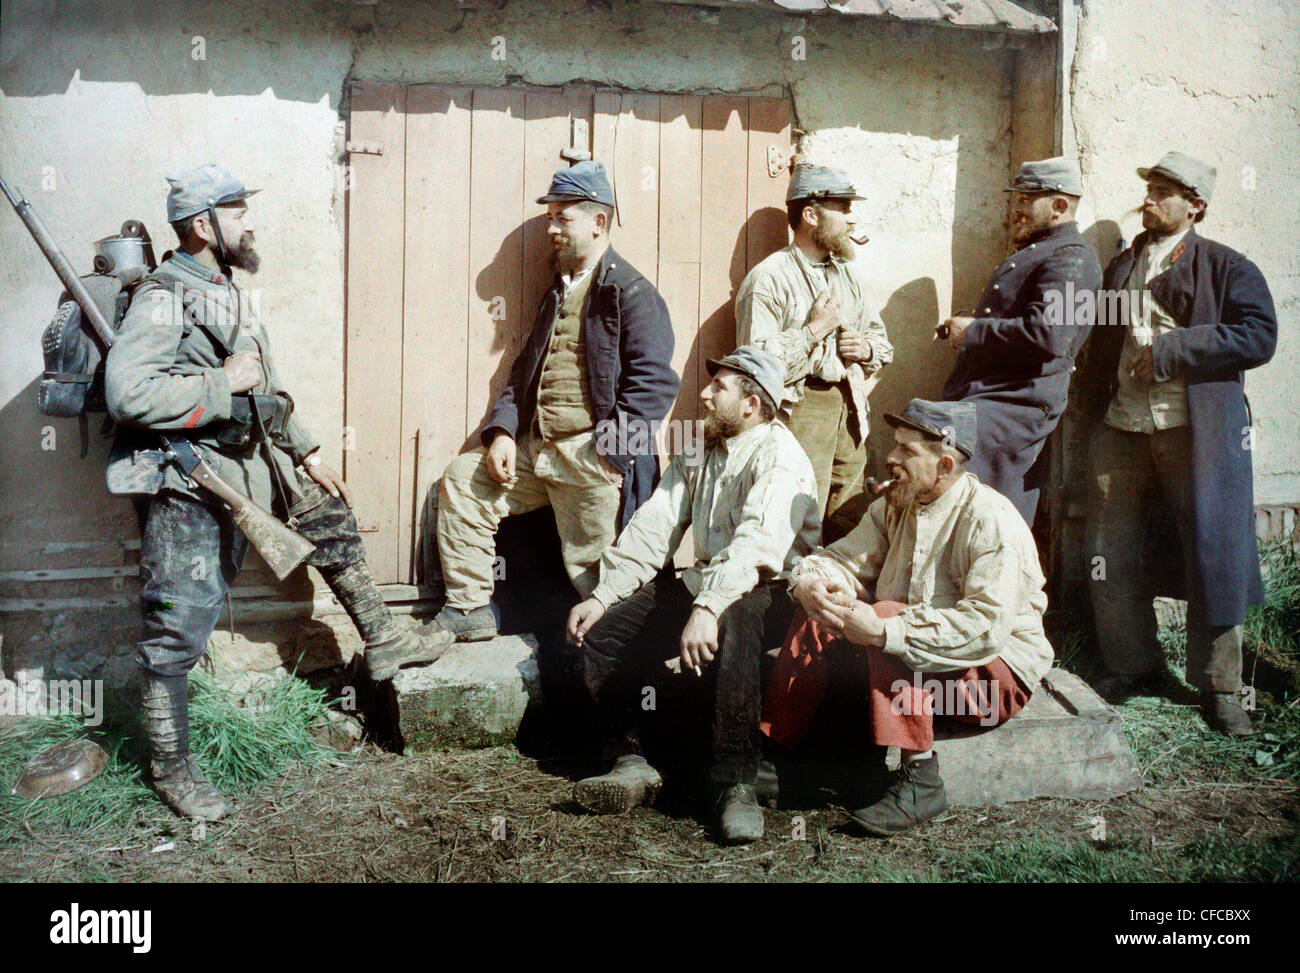 Seven, French, soldiers, army, military, talking, building, Western Front, gun, equipment, World War I, War, World War, Europe, Stock Photo